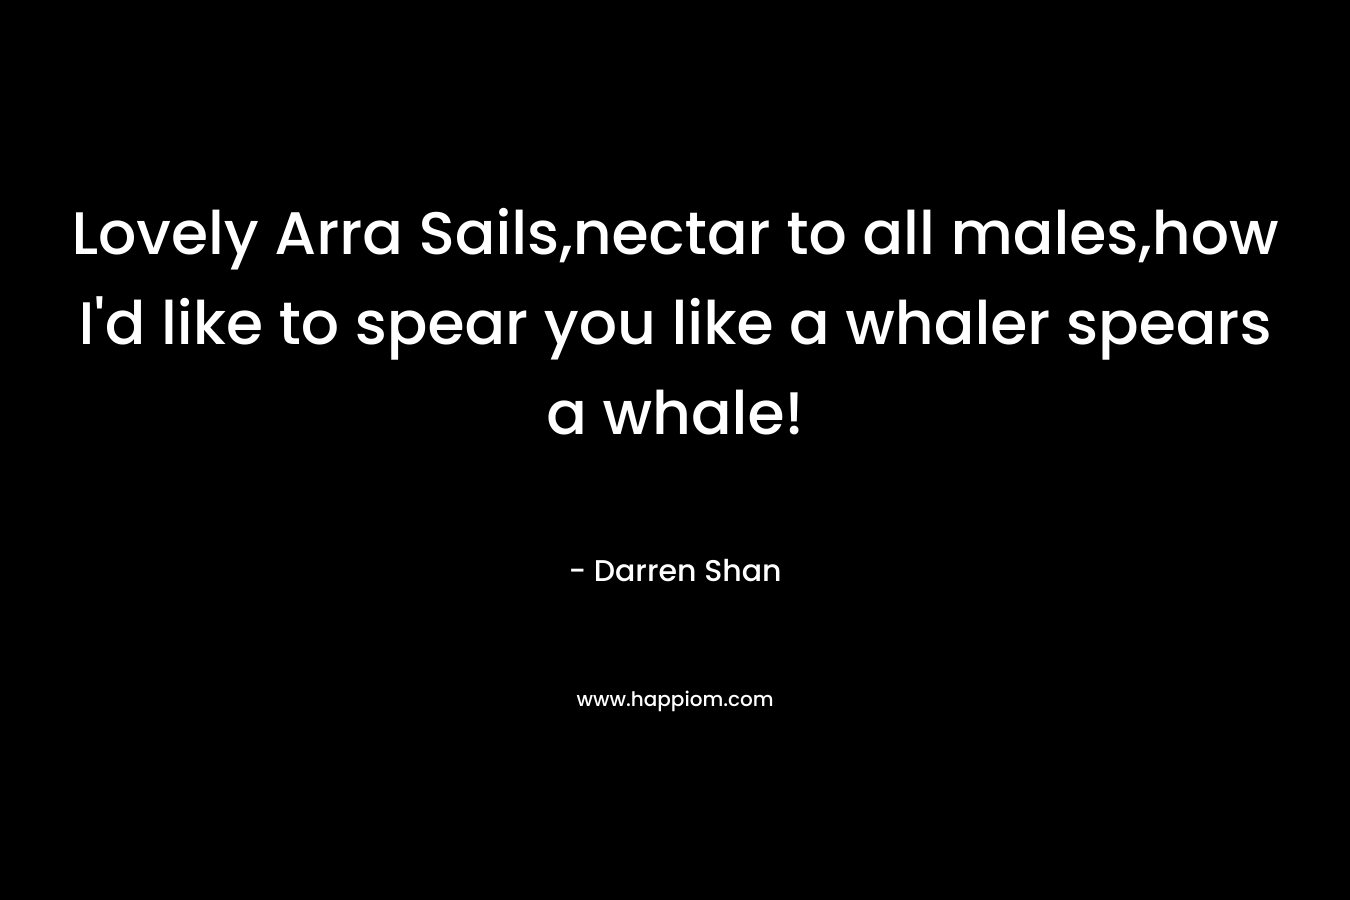 Lovely Arra Sails,nectar to all males,how I’d like to spear you like a whaler spears a whale! – Darren Shan